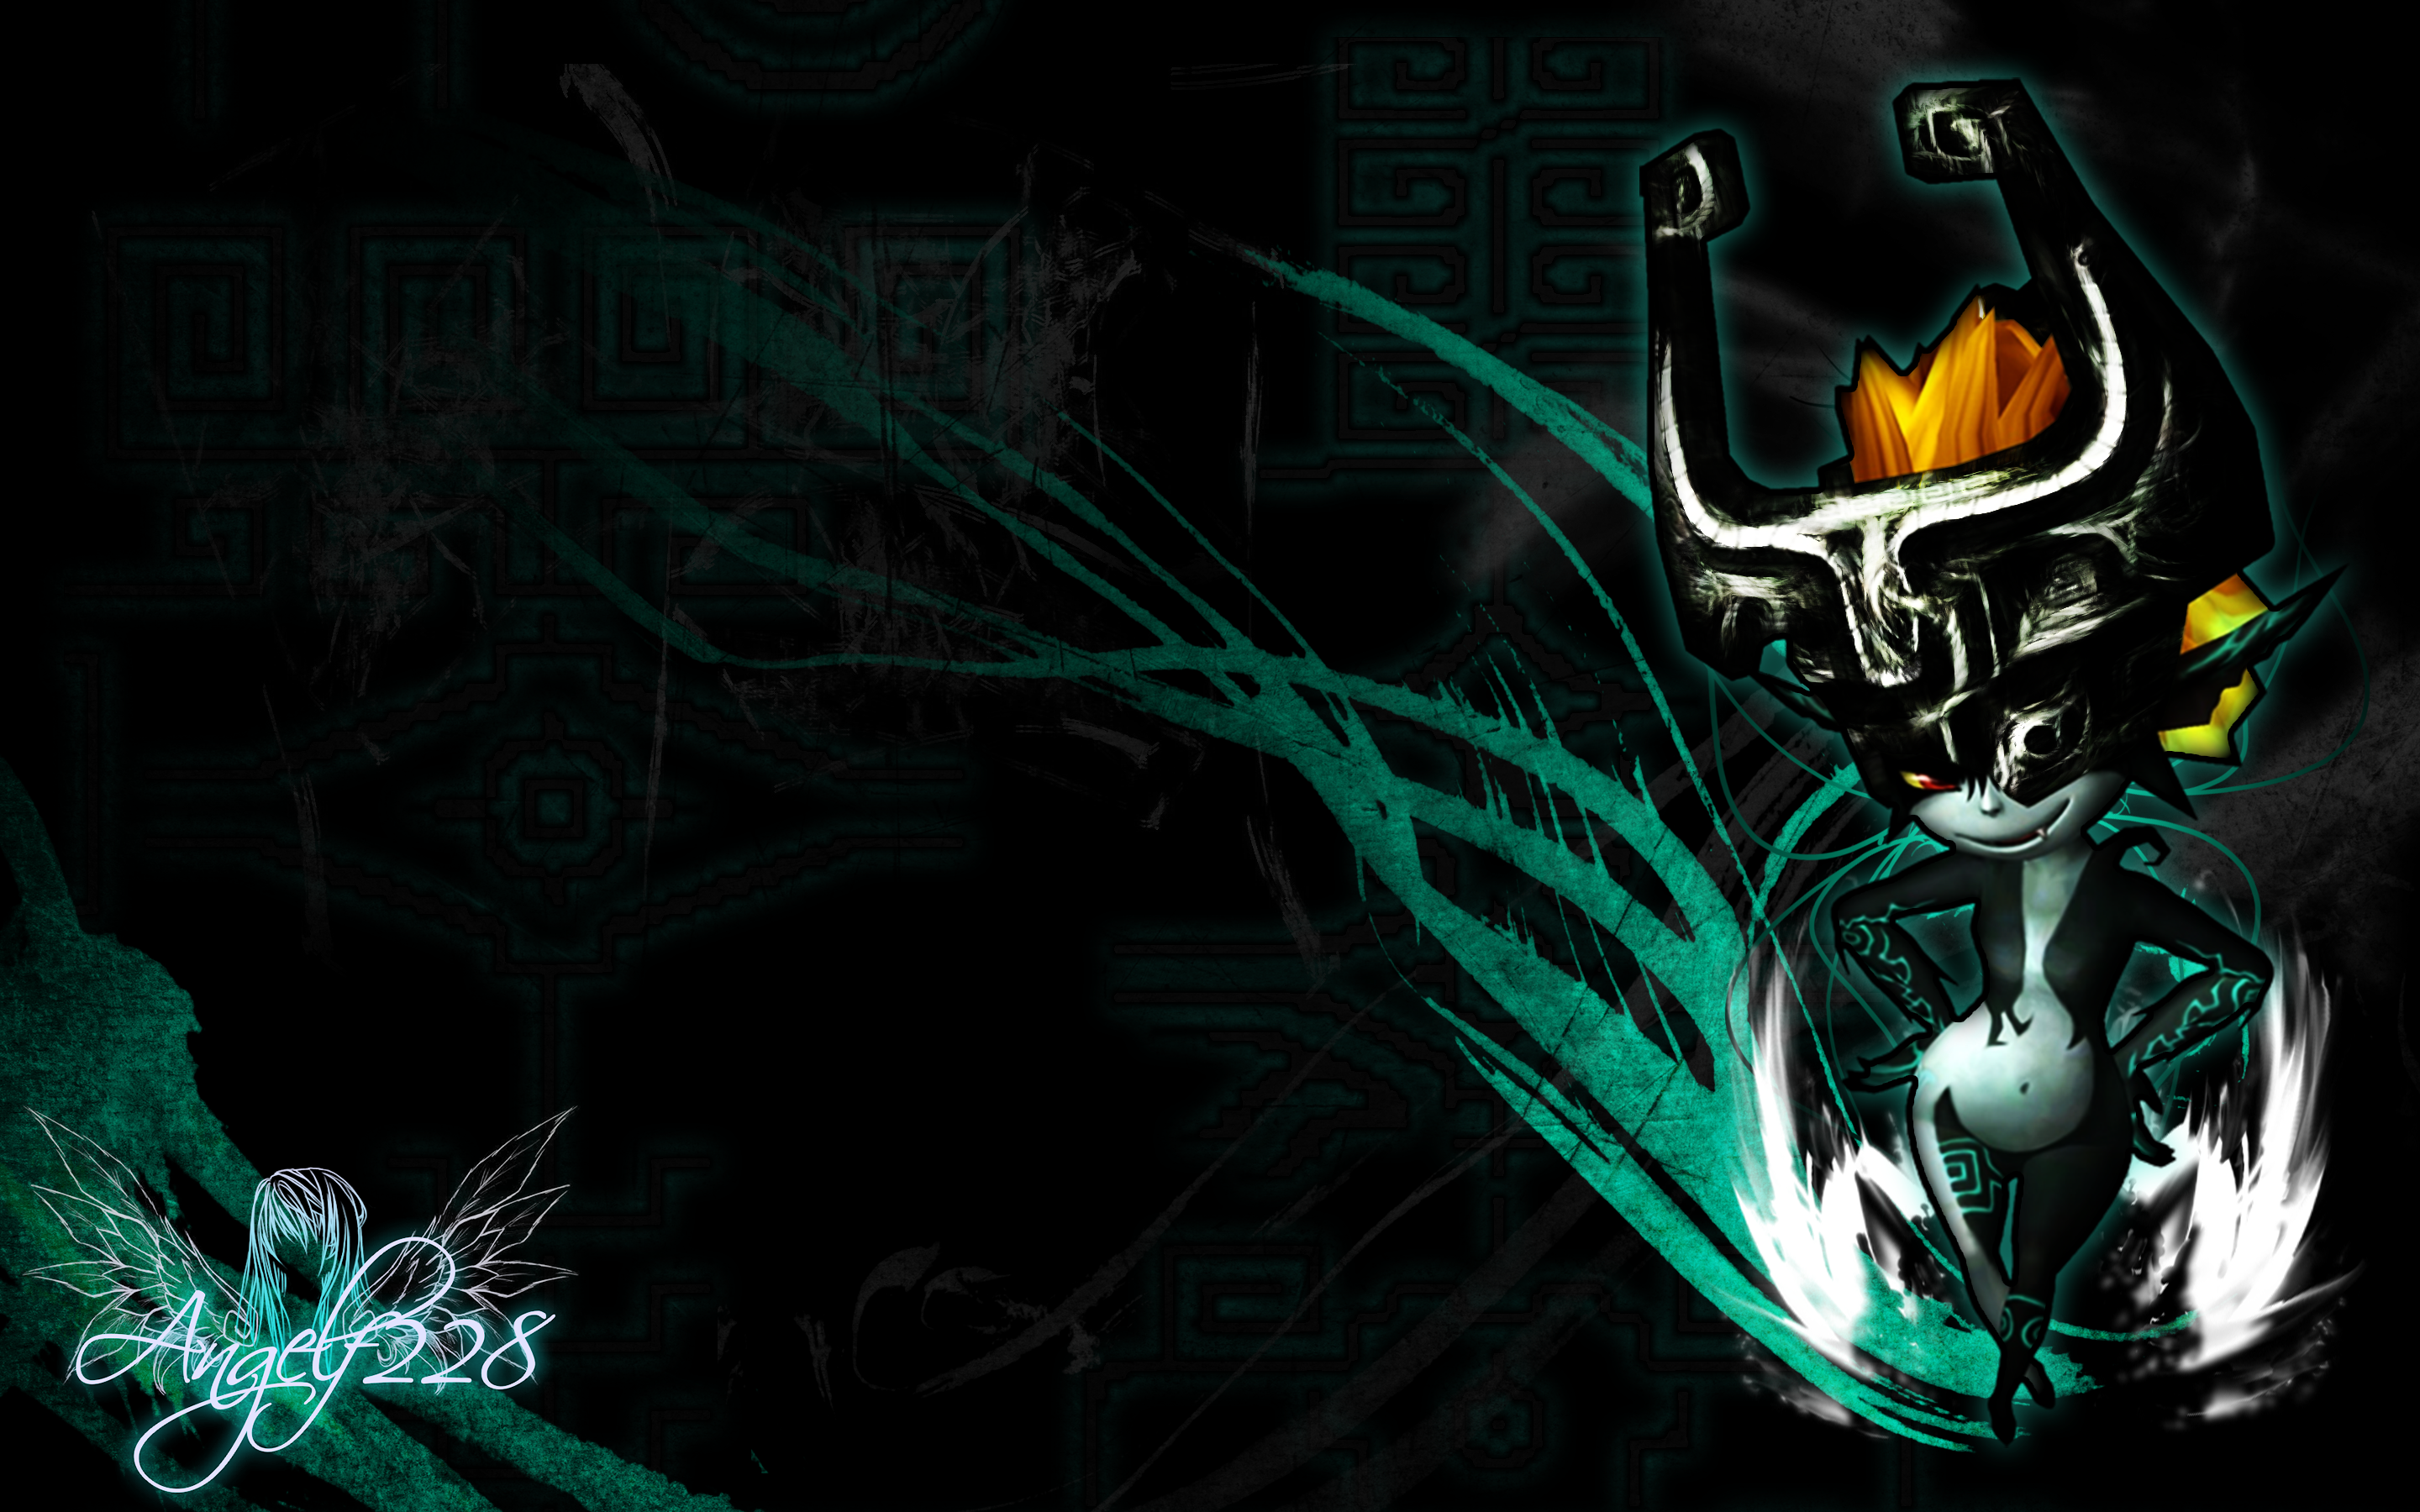 Wallpaper Other Angelf228 Of Midna From The Legend